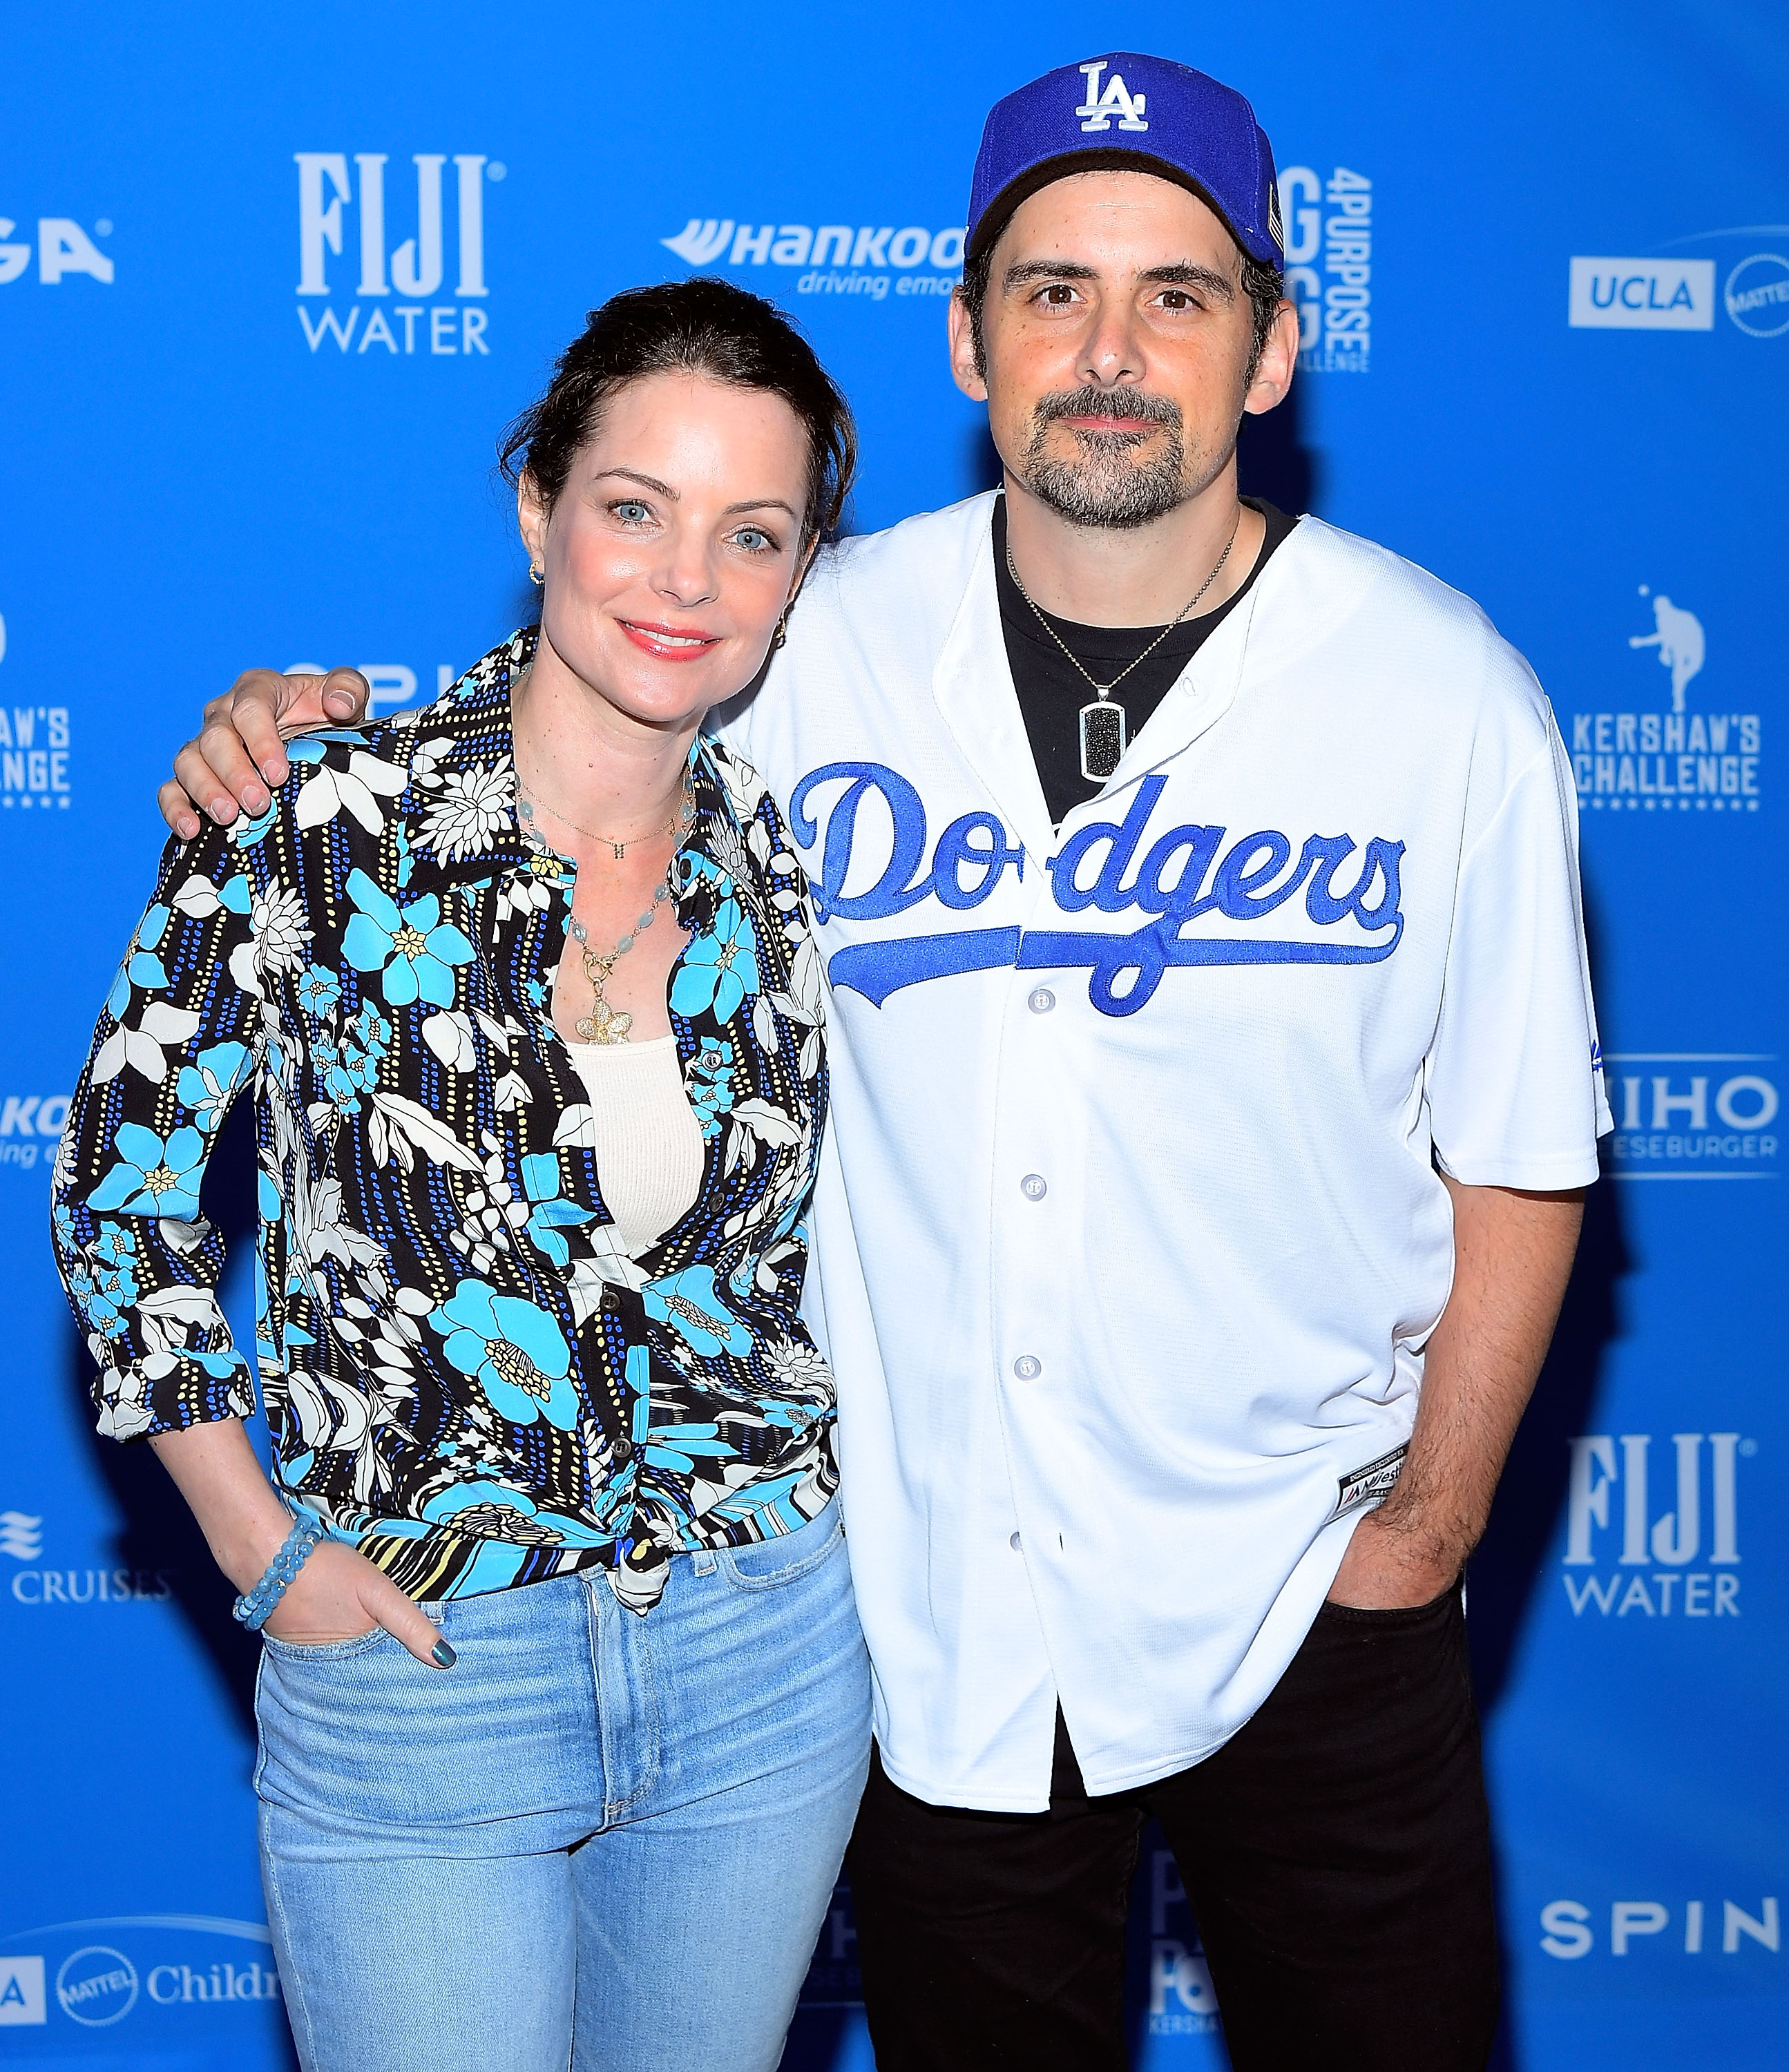 Kimberly Williams-Paisley and Brad Paisley attend FIJI Water, Official Water of Clayton Kershaw's 7th Annual Ping Pong 4 Purpose Fundraiser at Dodger Stadium on August 8, 2019 in Los Angeles, California. | Source: Getty Images